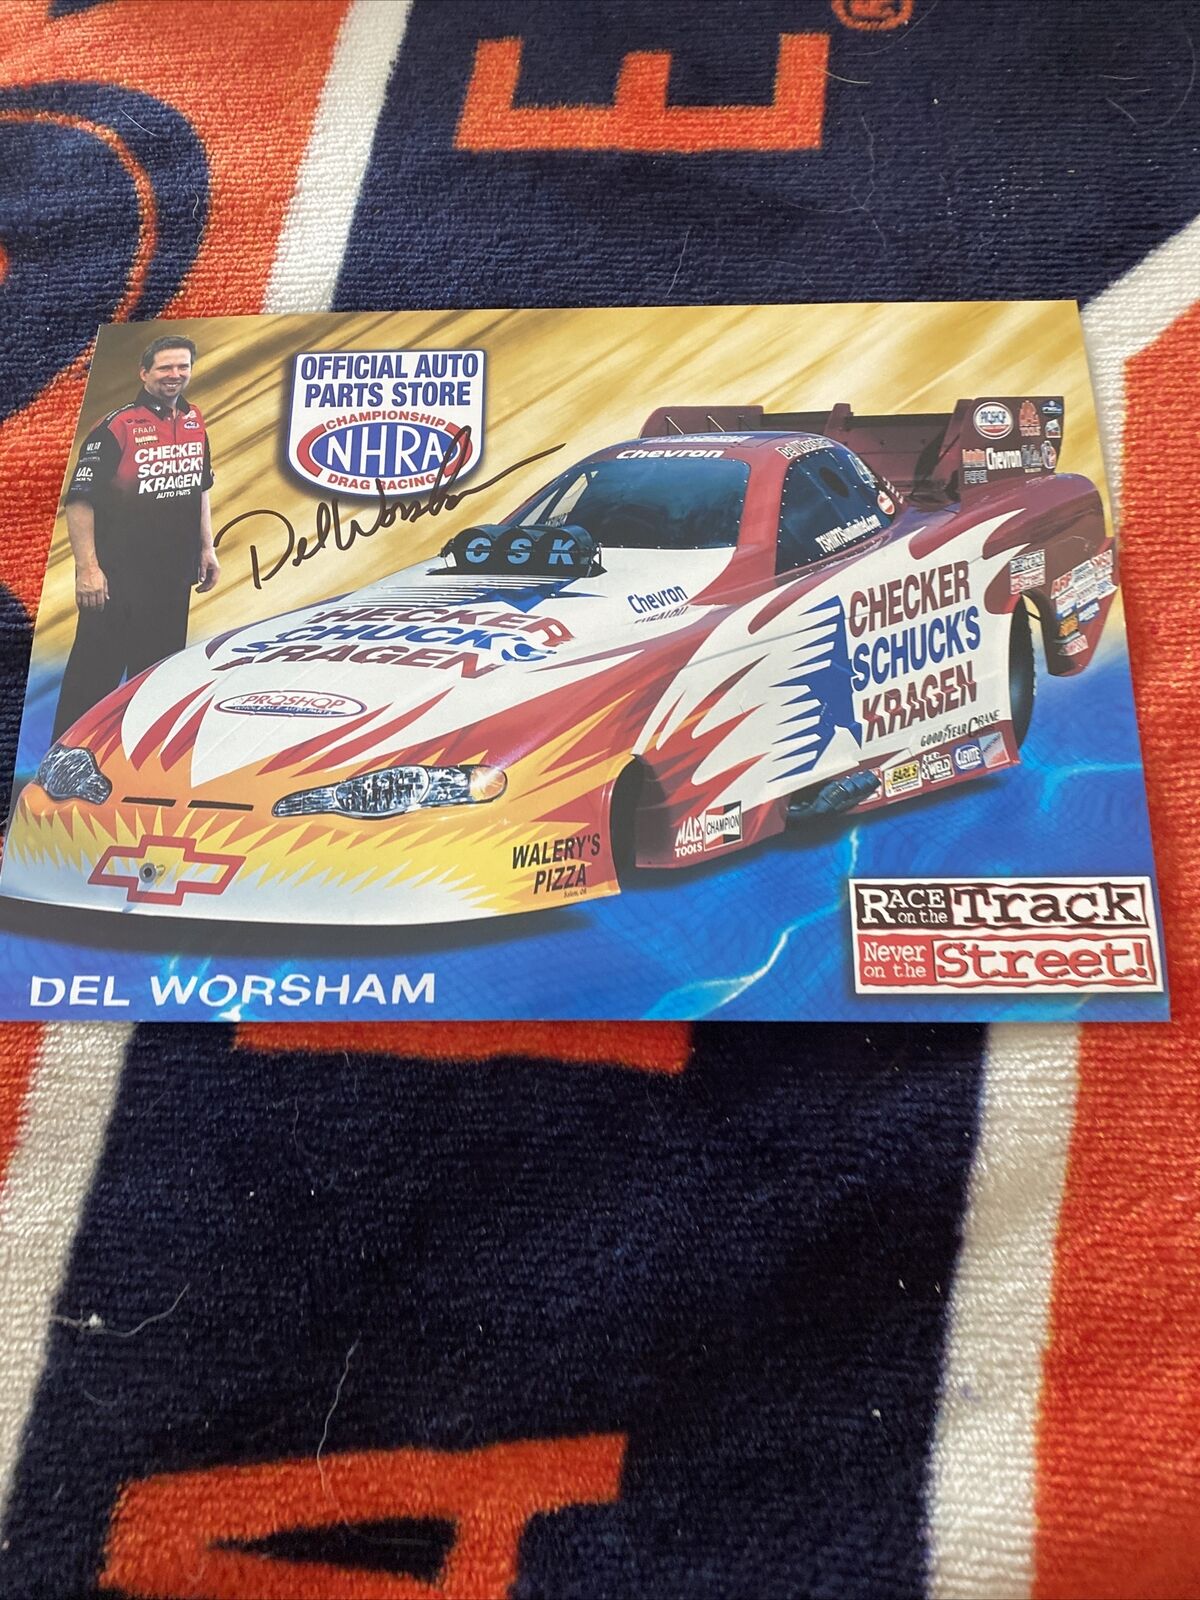 NHRA CHAMPION DRIVER DEL WORSHAM, Extremely RARE AUTOGRAPHED 200